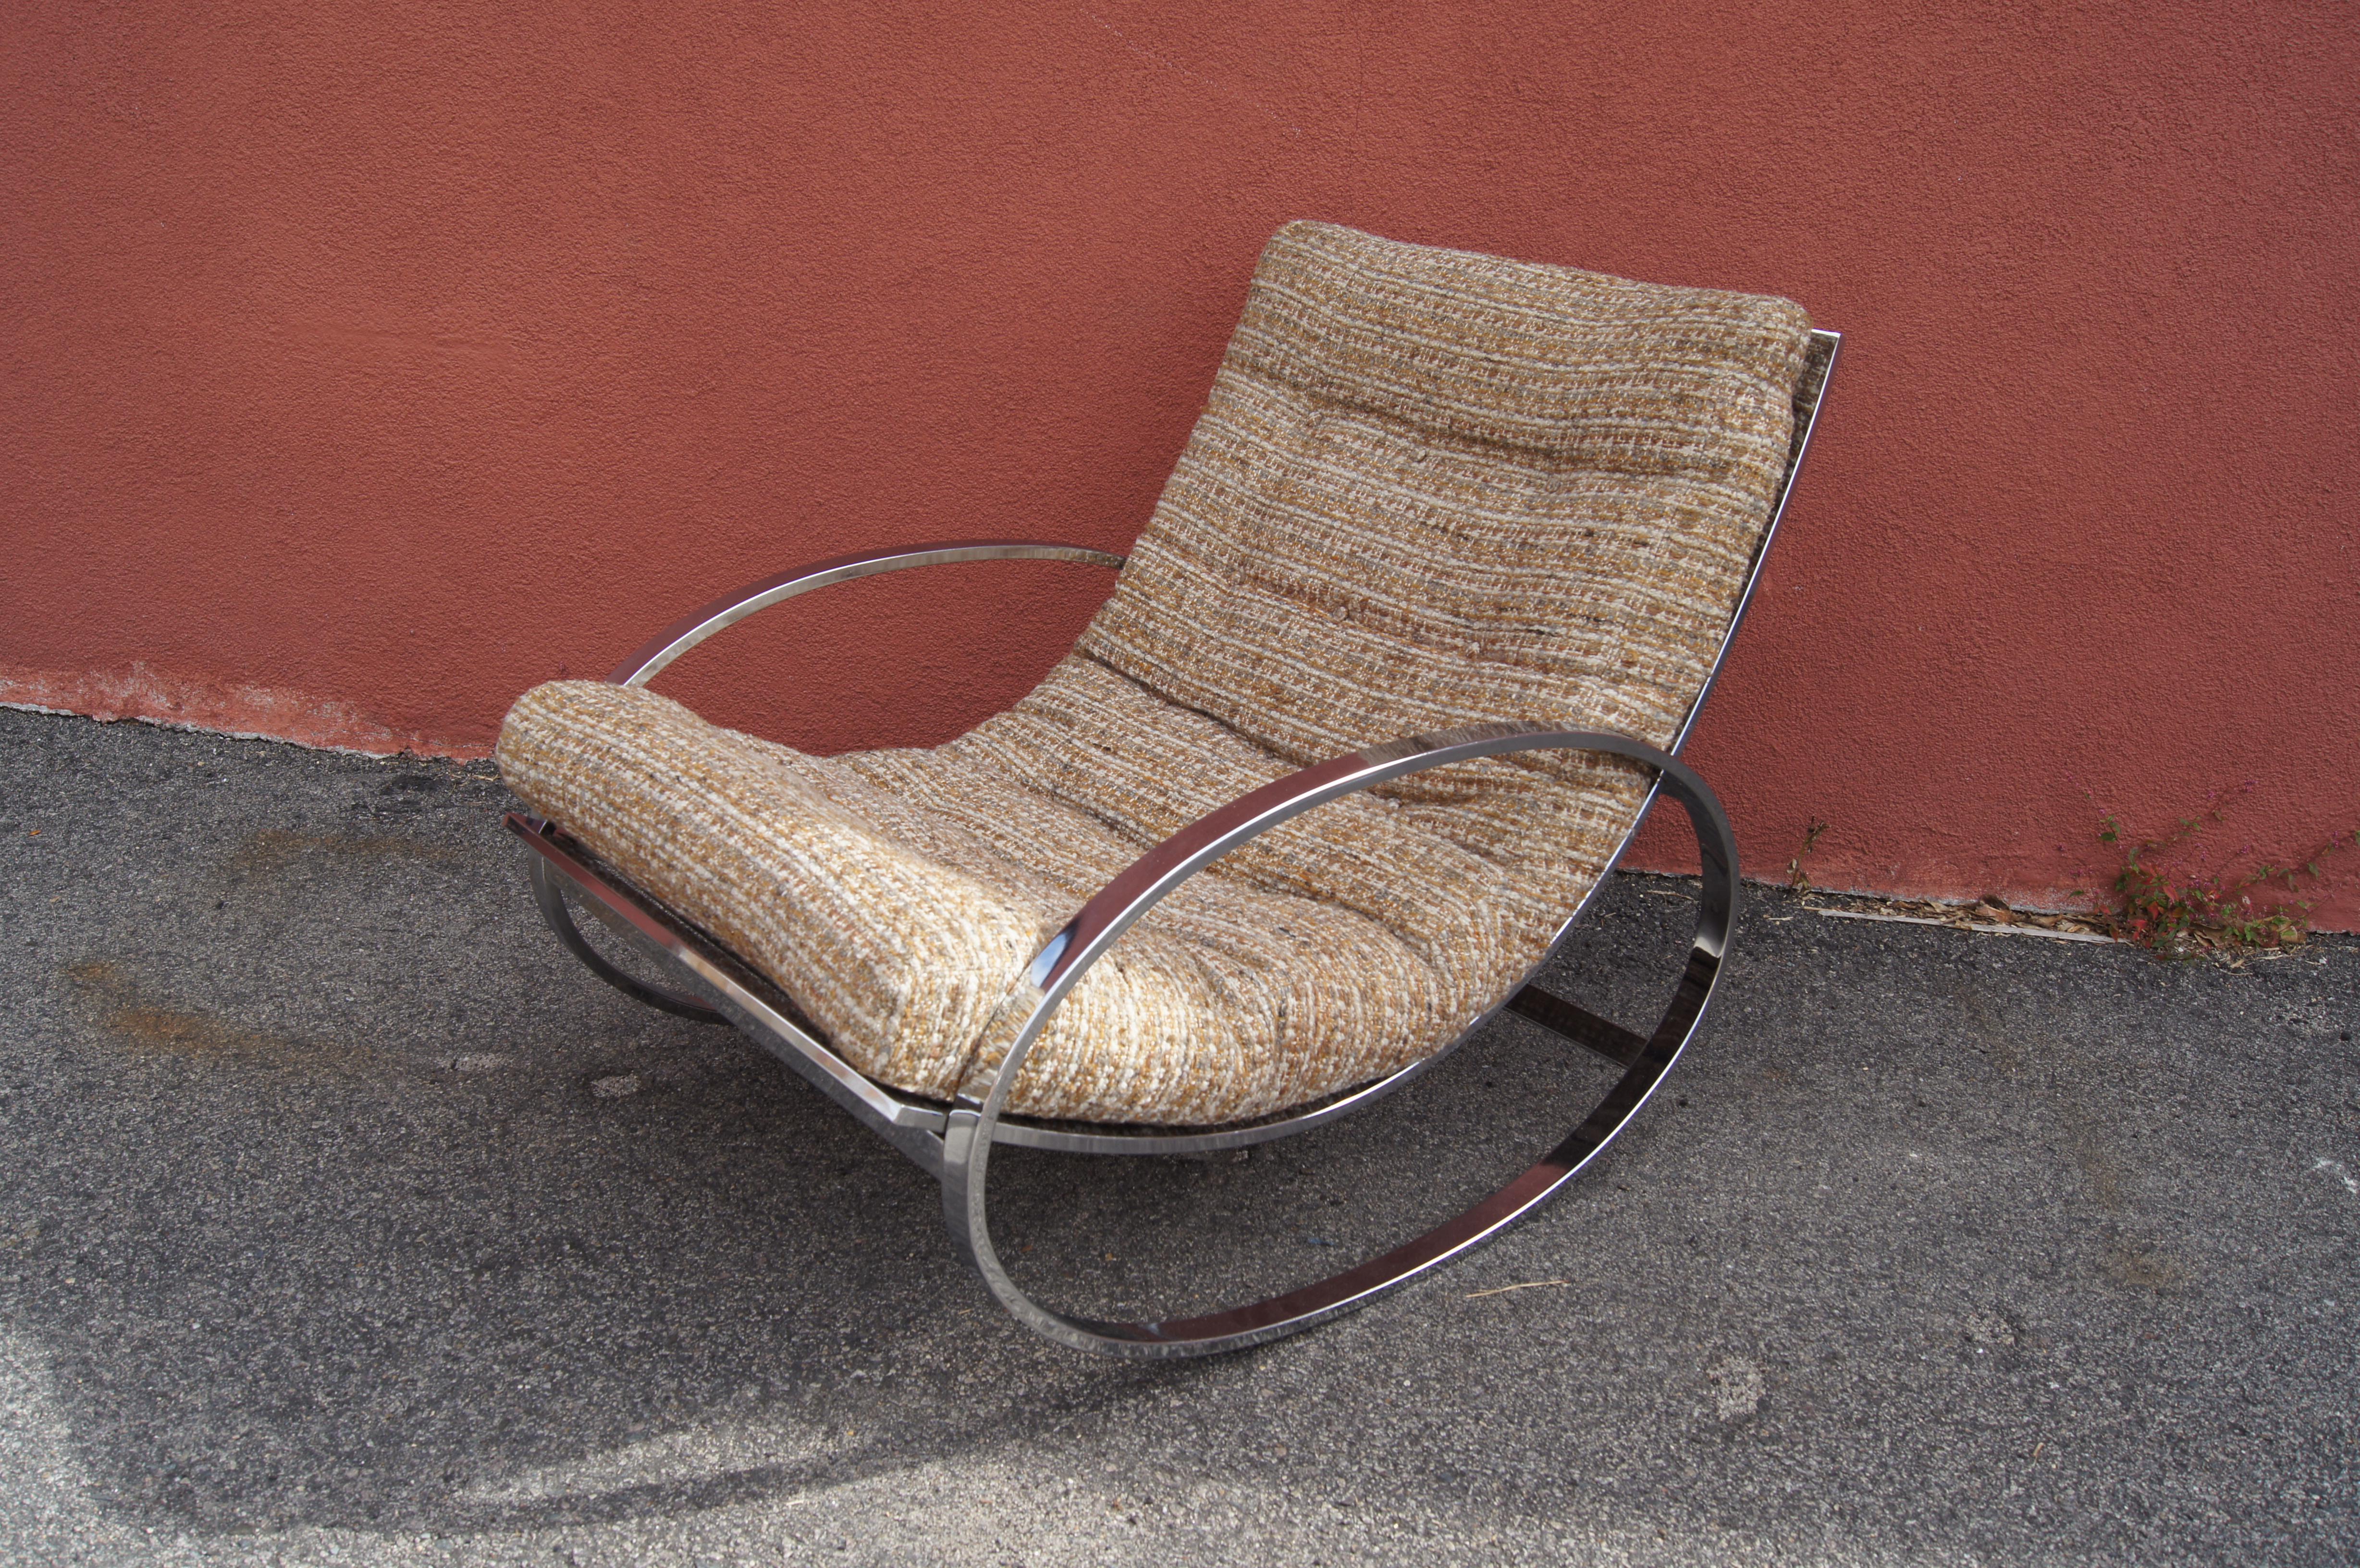 This fabulous rocking chair, made in Italy, imported by Selig, sets a deeply comfortable swoop of cushion on a polished chrome frame between oval rockers.

The seat height ranges from 19 inches at the highest point to 13 inches at the lowest.